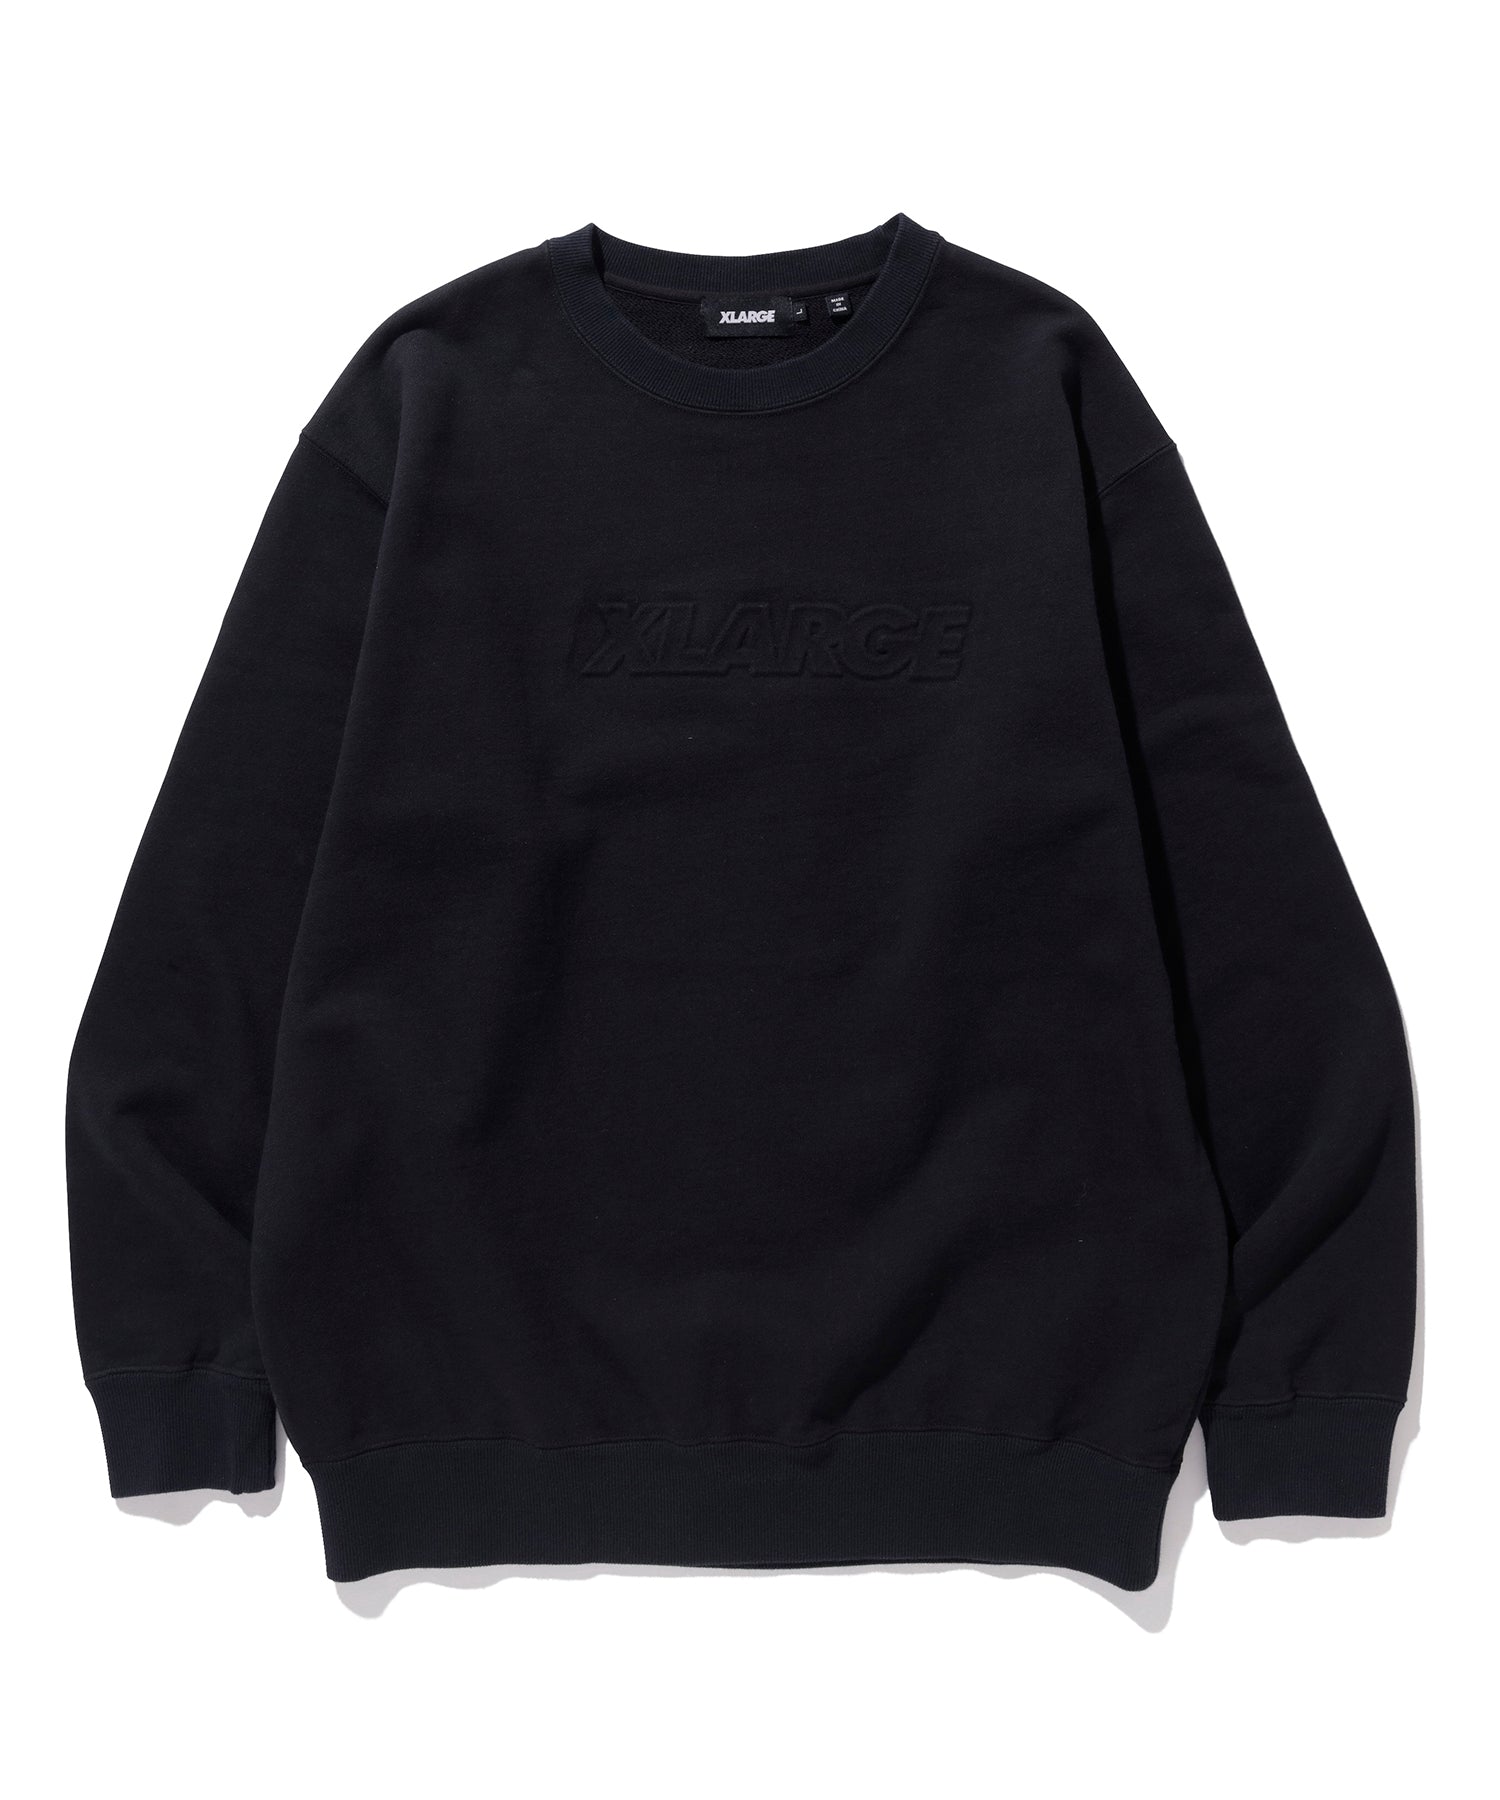 STANDARD LOGO PATCHED CREW NECK SWEAT